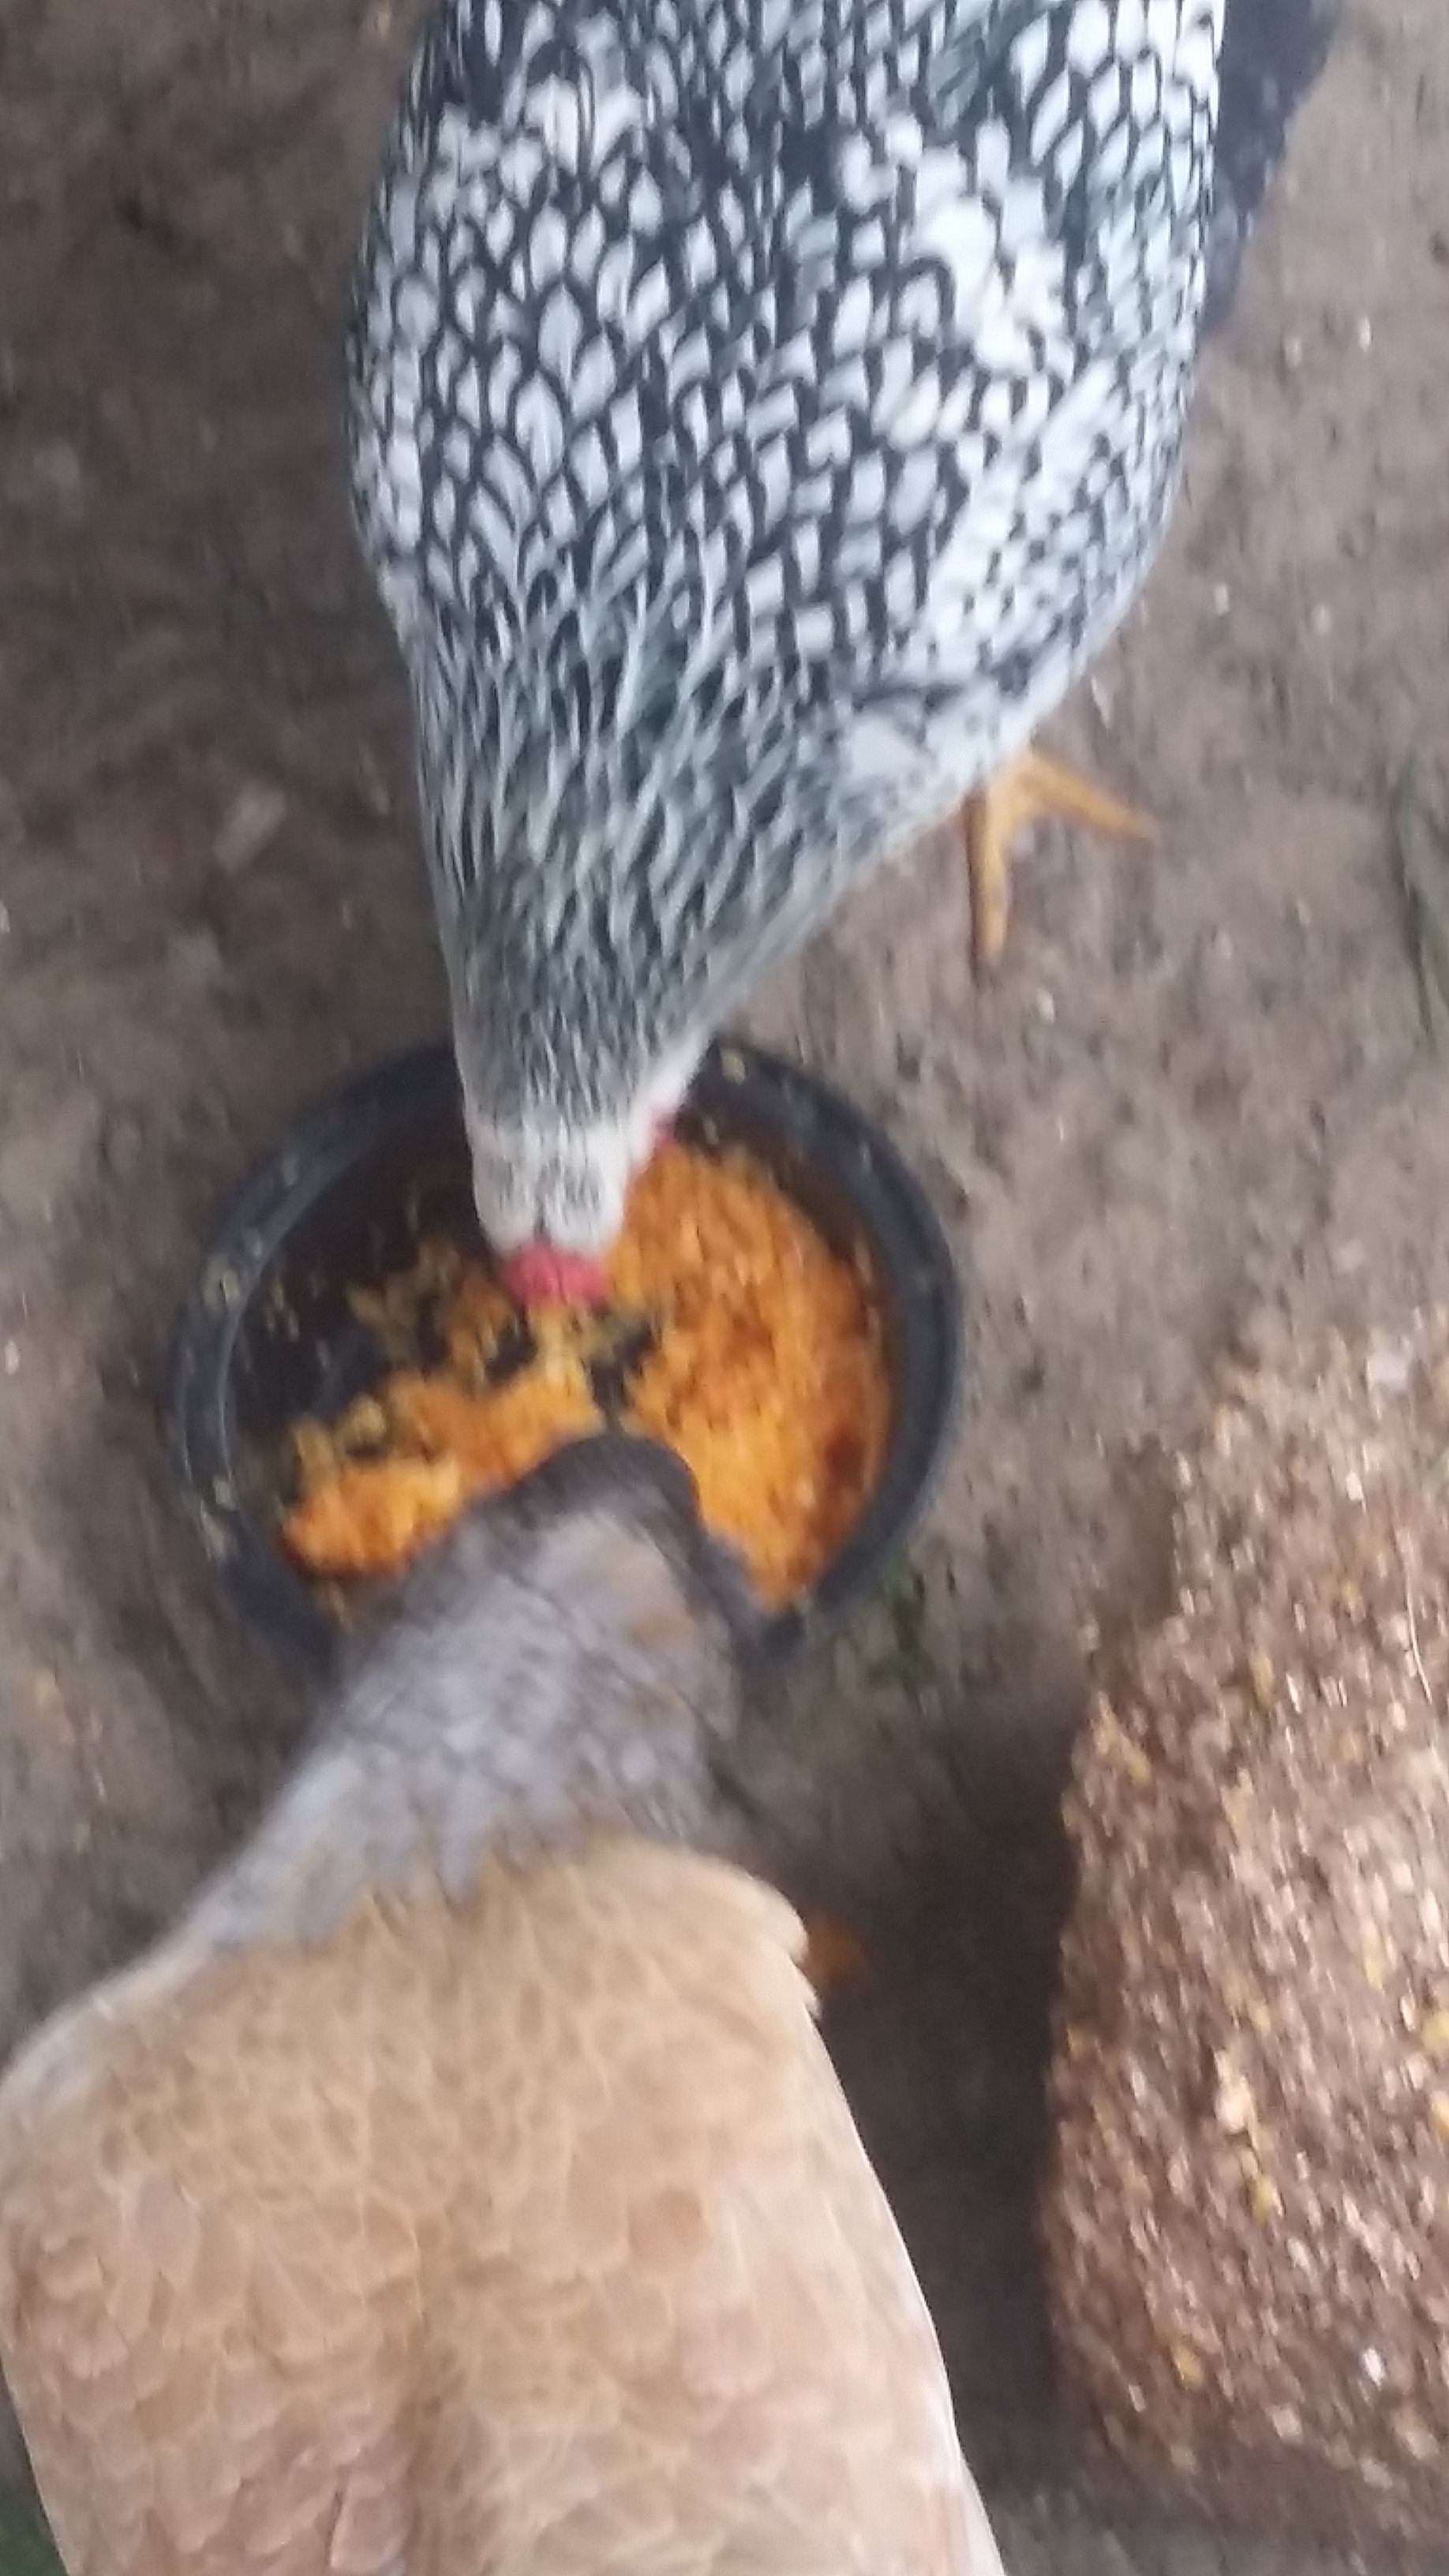 Arlene and Nugget sharing some pumpkin, this is rare for them to be sharing